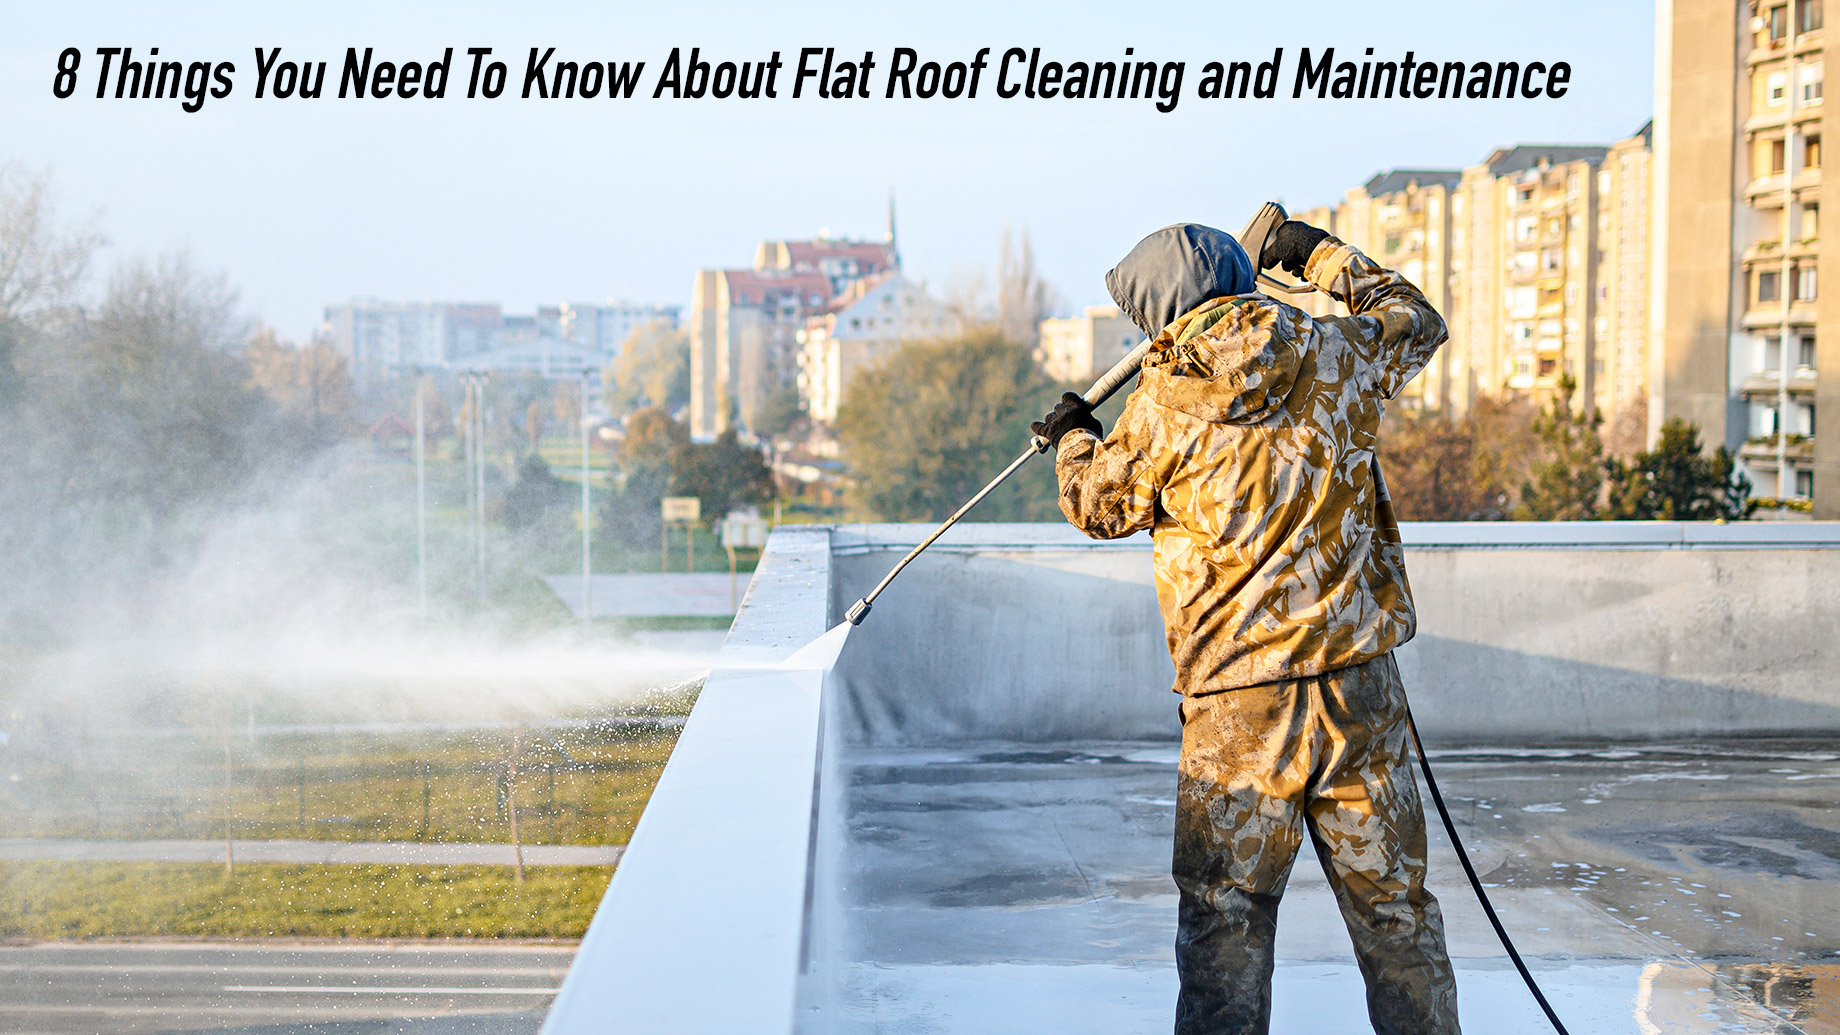 8 Things You Need To Know About Flat Roof Cleaning and Maintenance